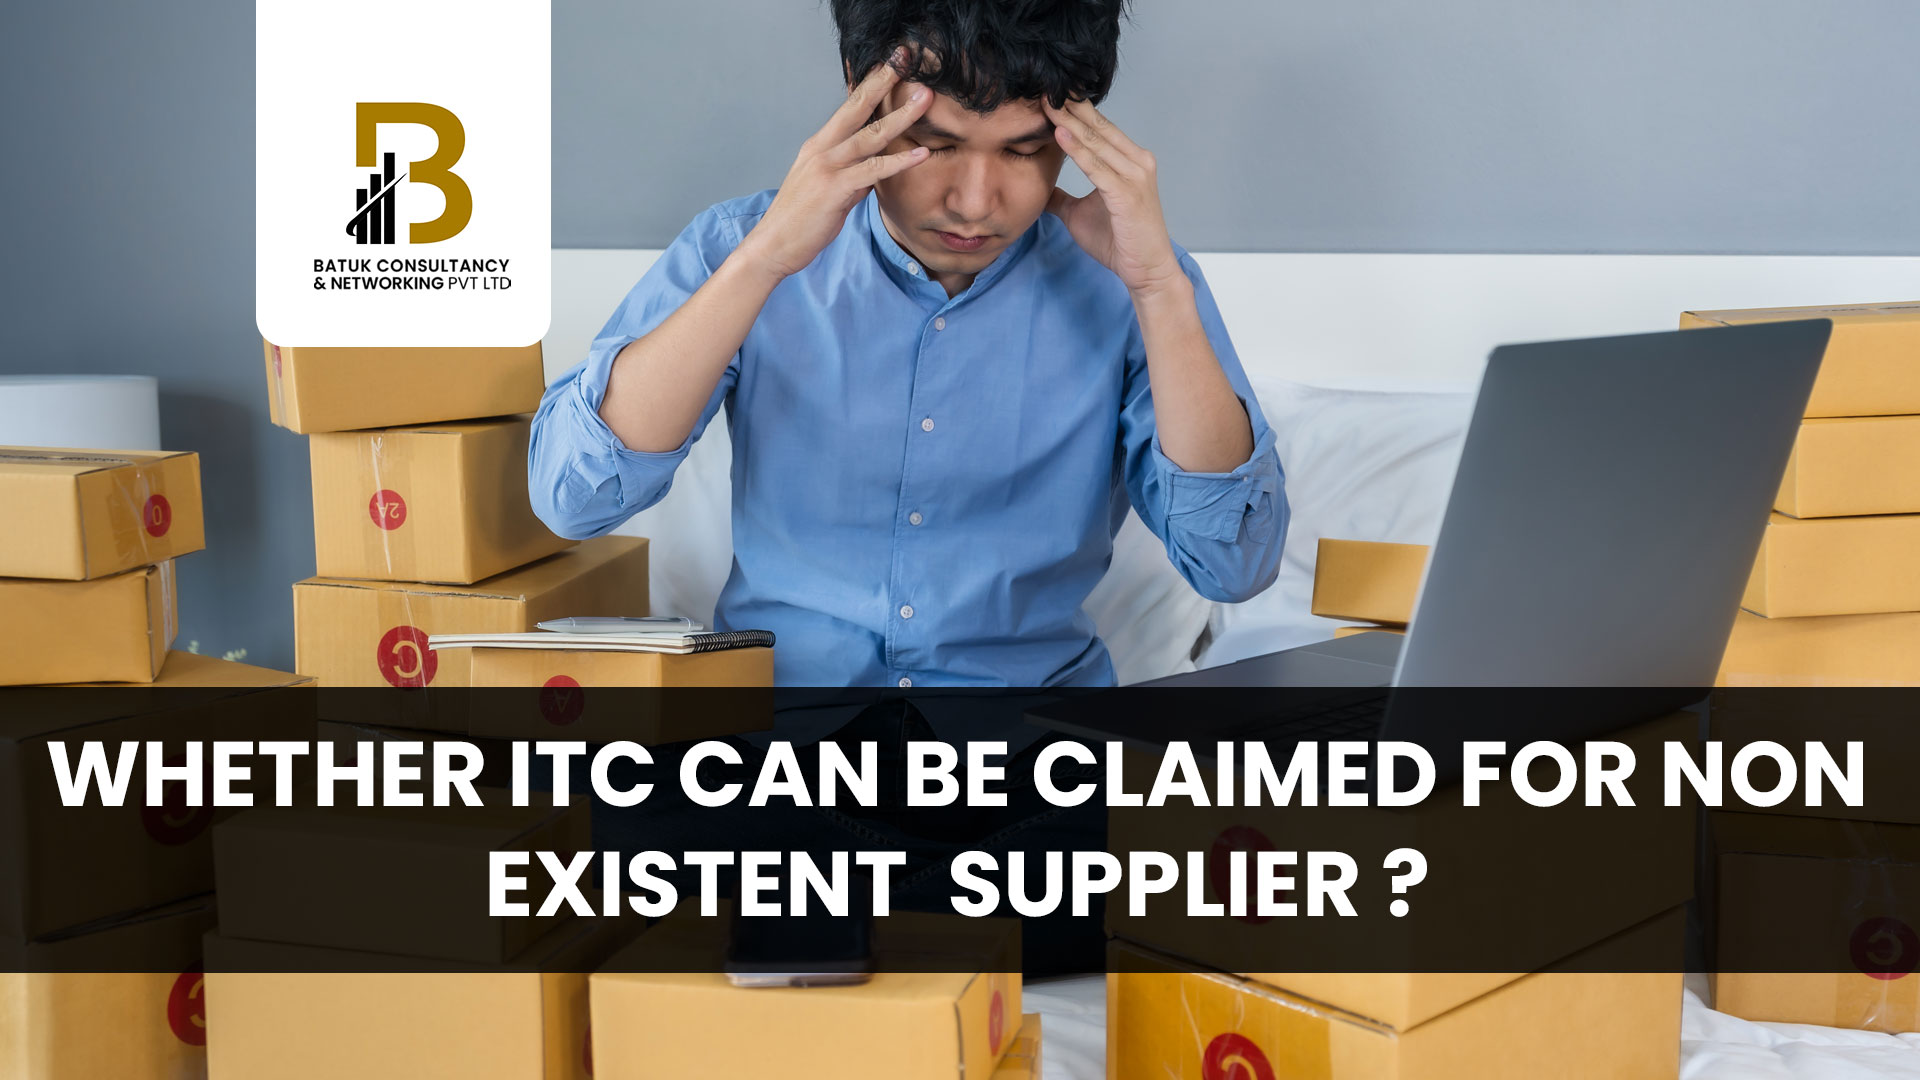 Whether ITC can be claimed for non existent Supplier